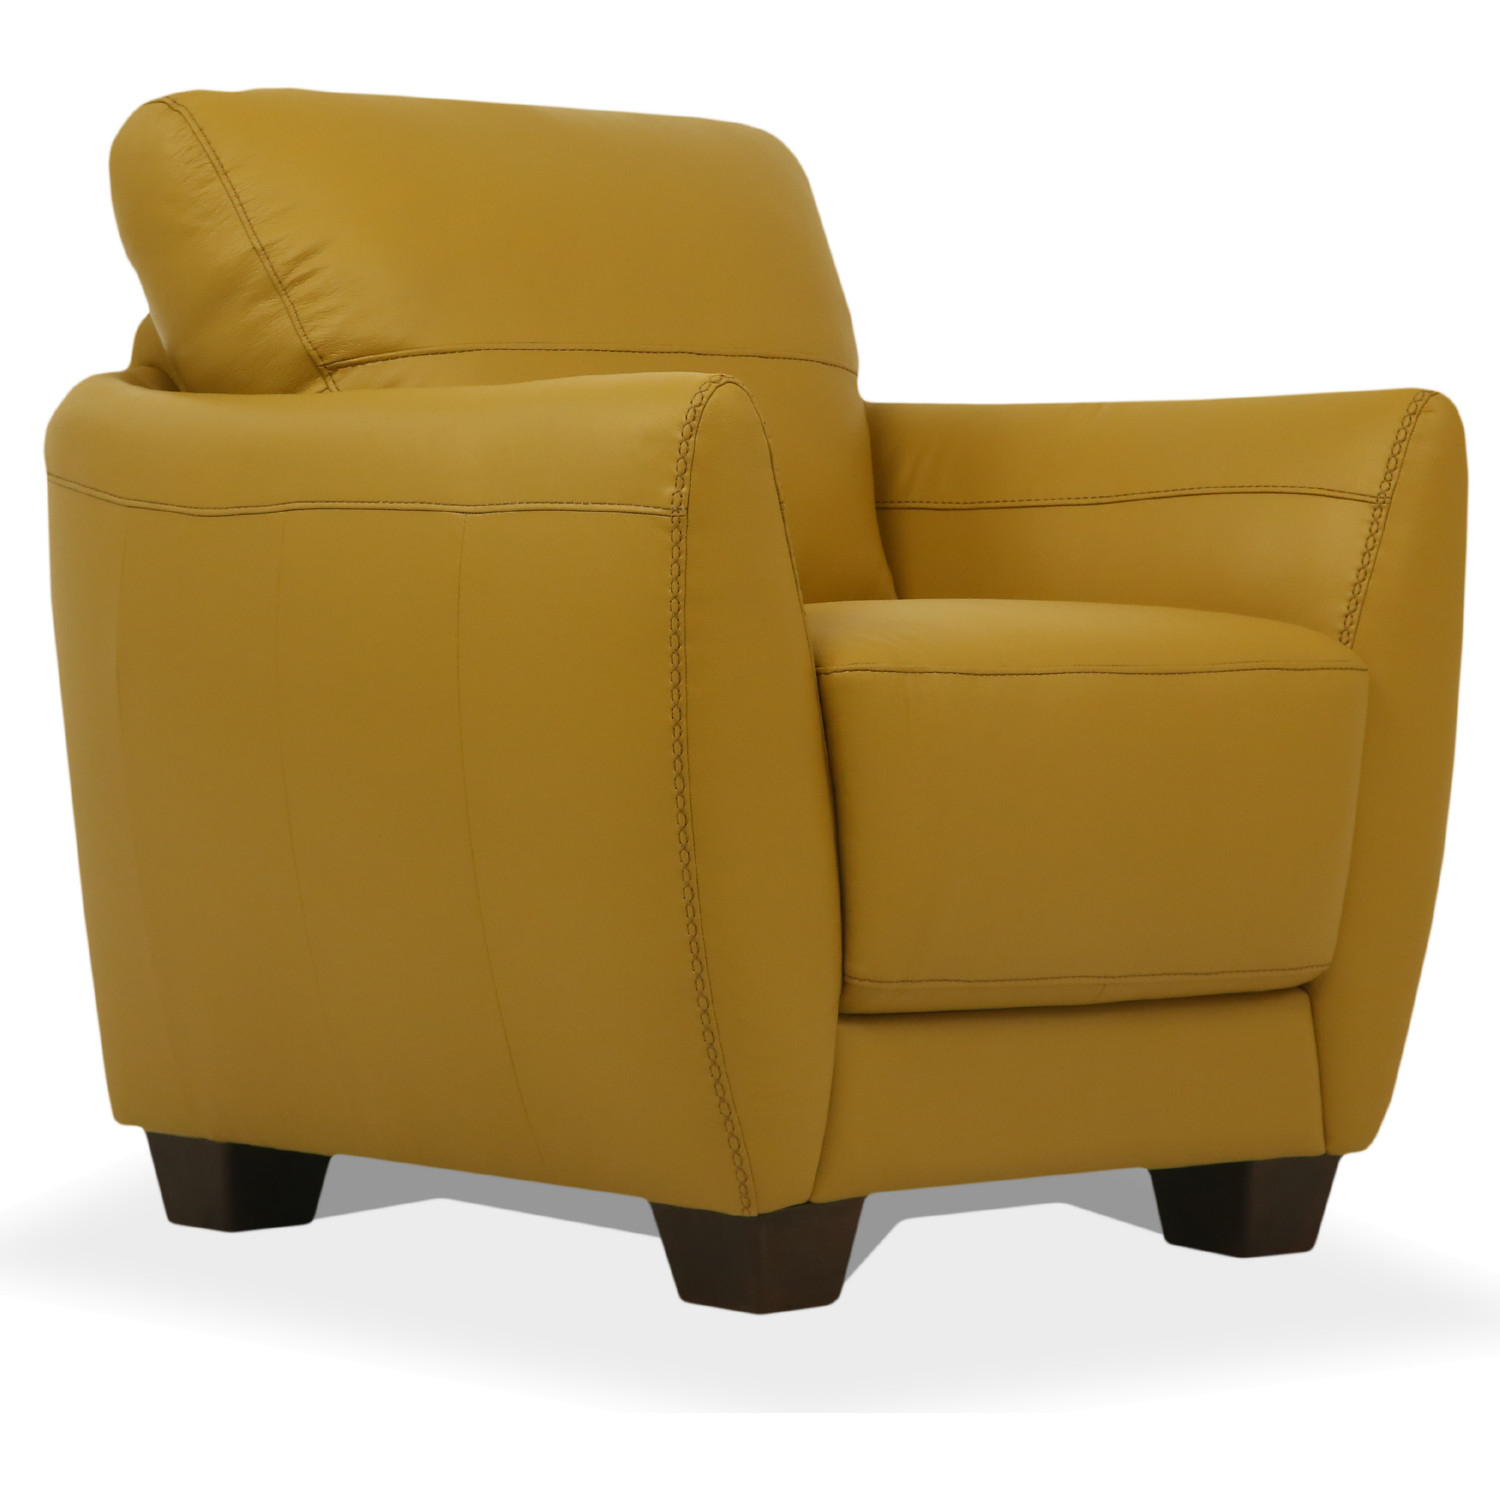 54947 Valeria Accent Chair In Mustard, Yellow Leather Chair